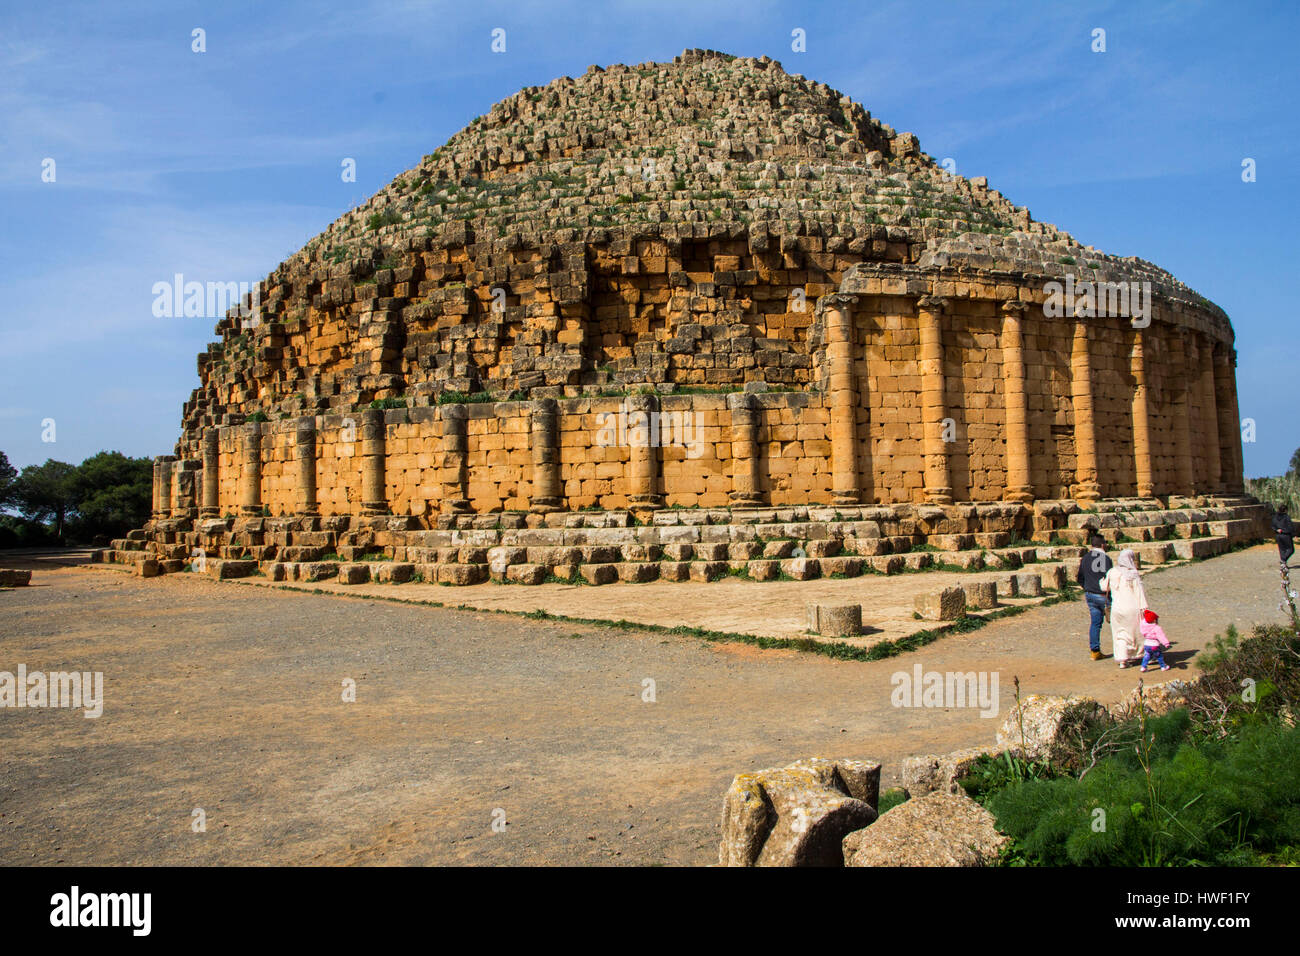 Royal Mausoleum of Mauretania in Algeria, a funerary monument built in 3BC by the King of Mauretania, Juba II, and his Queen Cleopatra Selene II. Stock Photo